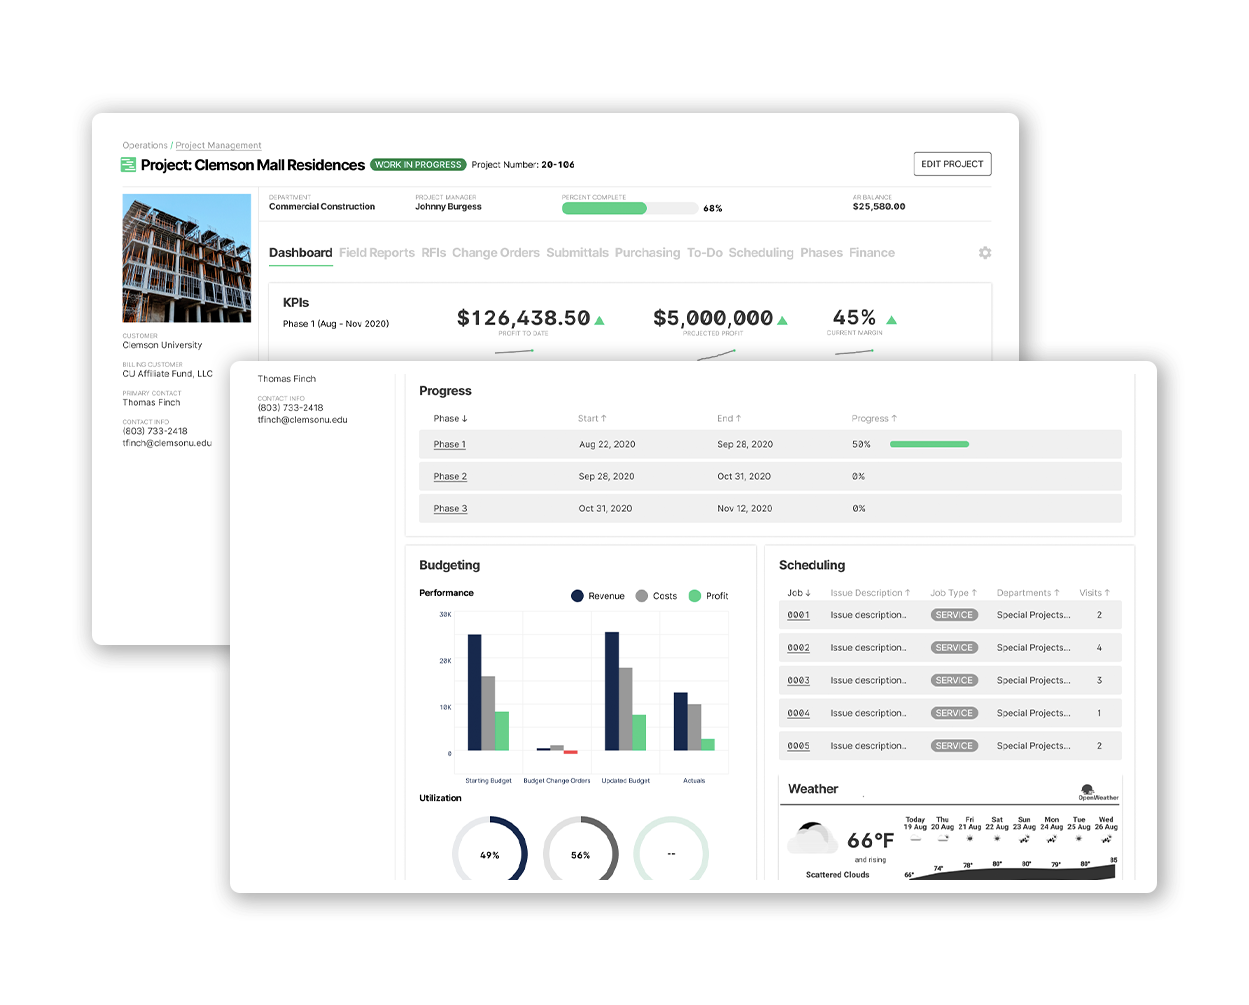 BuildOps Software - BuildOps Project Management: Deliver on schedule + within budget with full visibility into the critical KPIs (+ more):
- Projected profit + profit to date
- Margins
- Budgeting, job costing + utilization amounts
- Even the weather on location